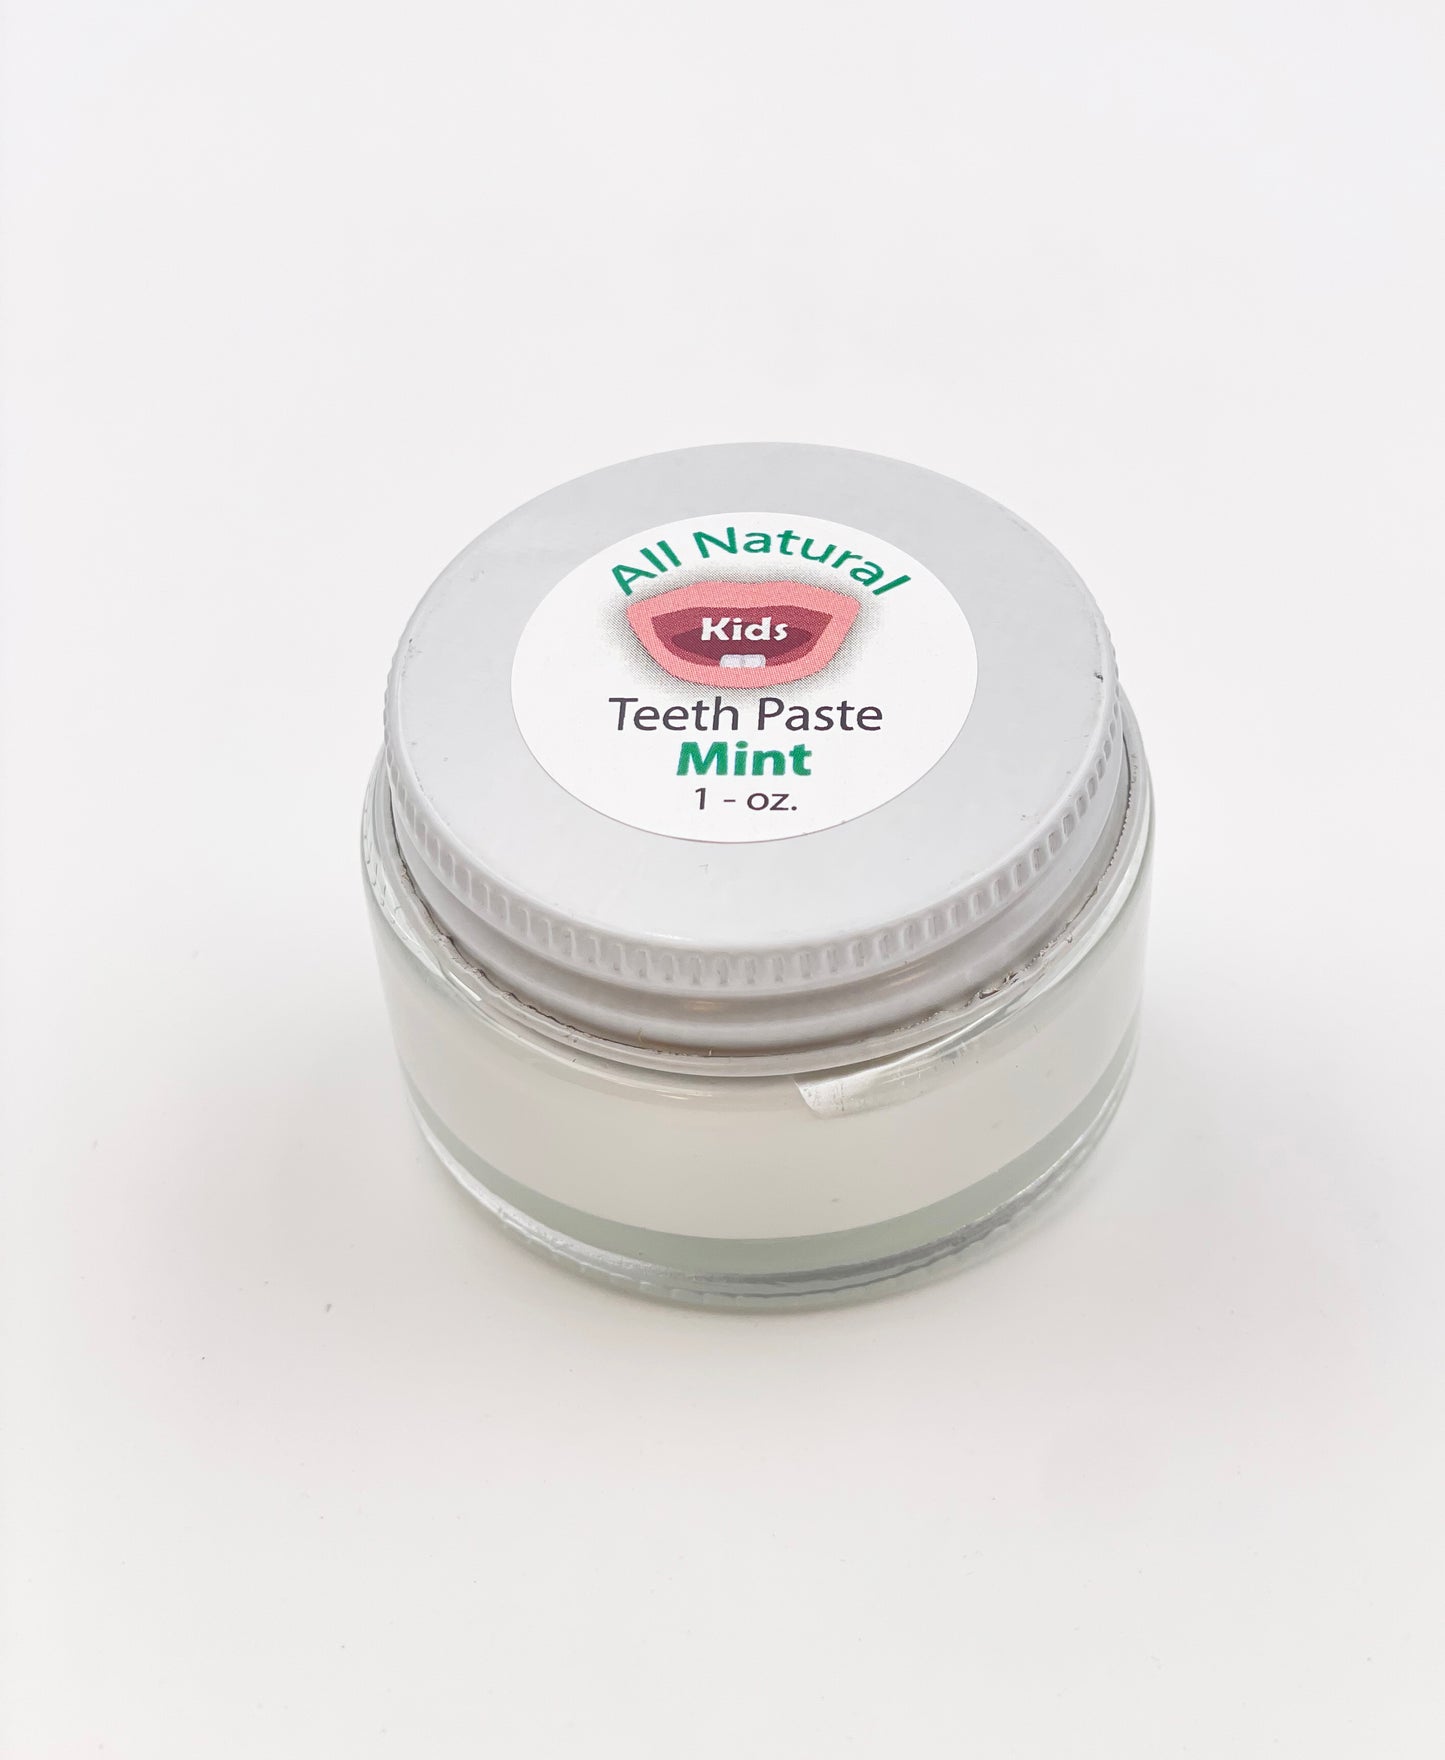 BALM! Baby - Teeth Paste Natural Kids Toothpaste w/ xylitol - Plastic Free jar